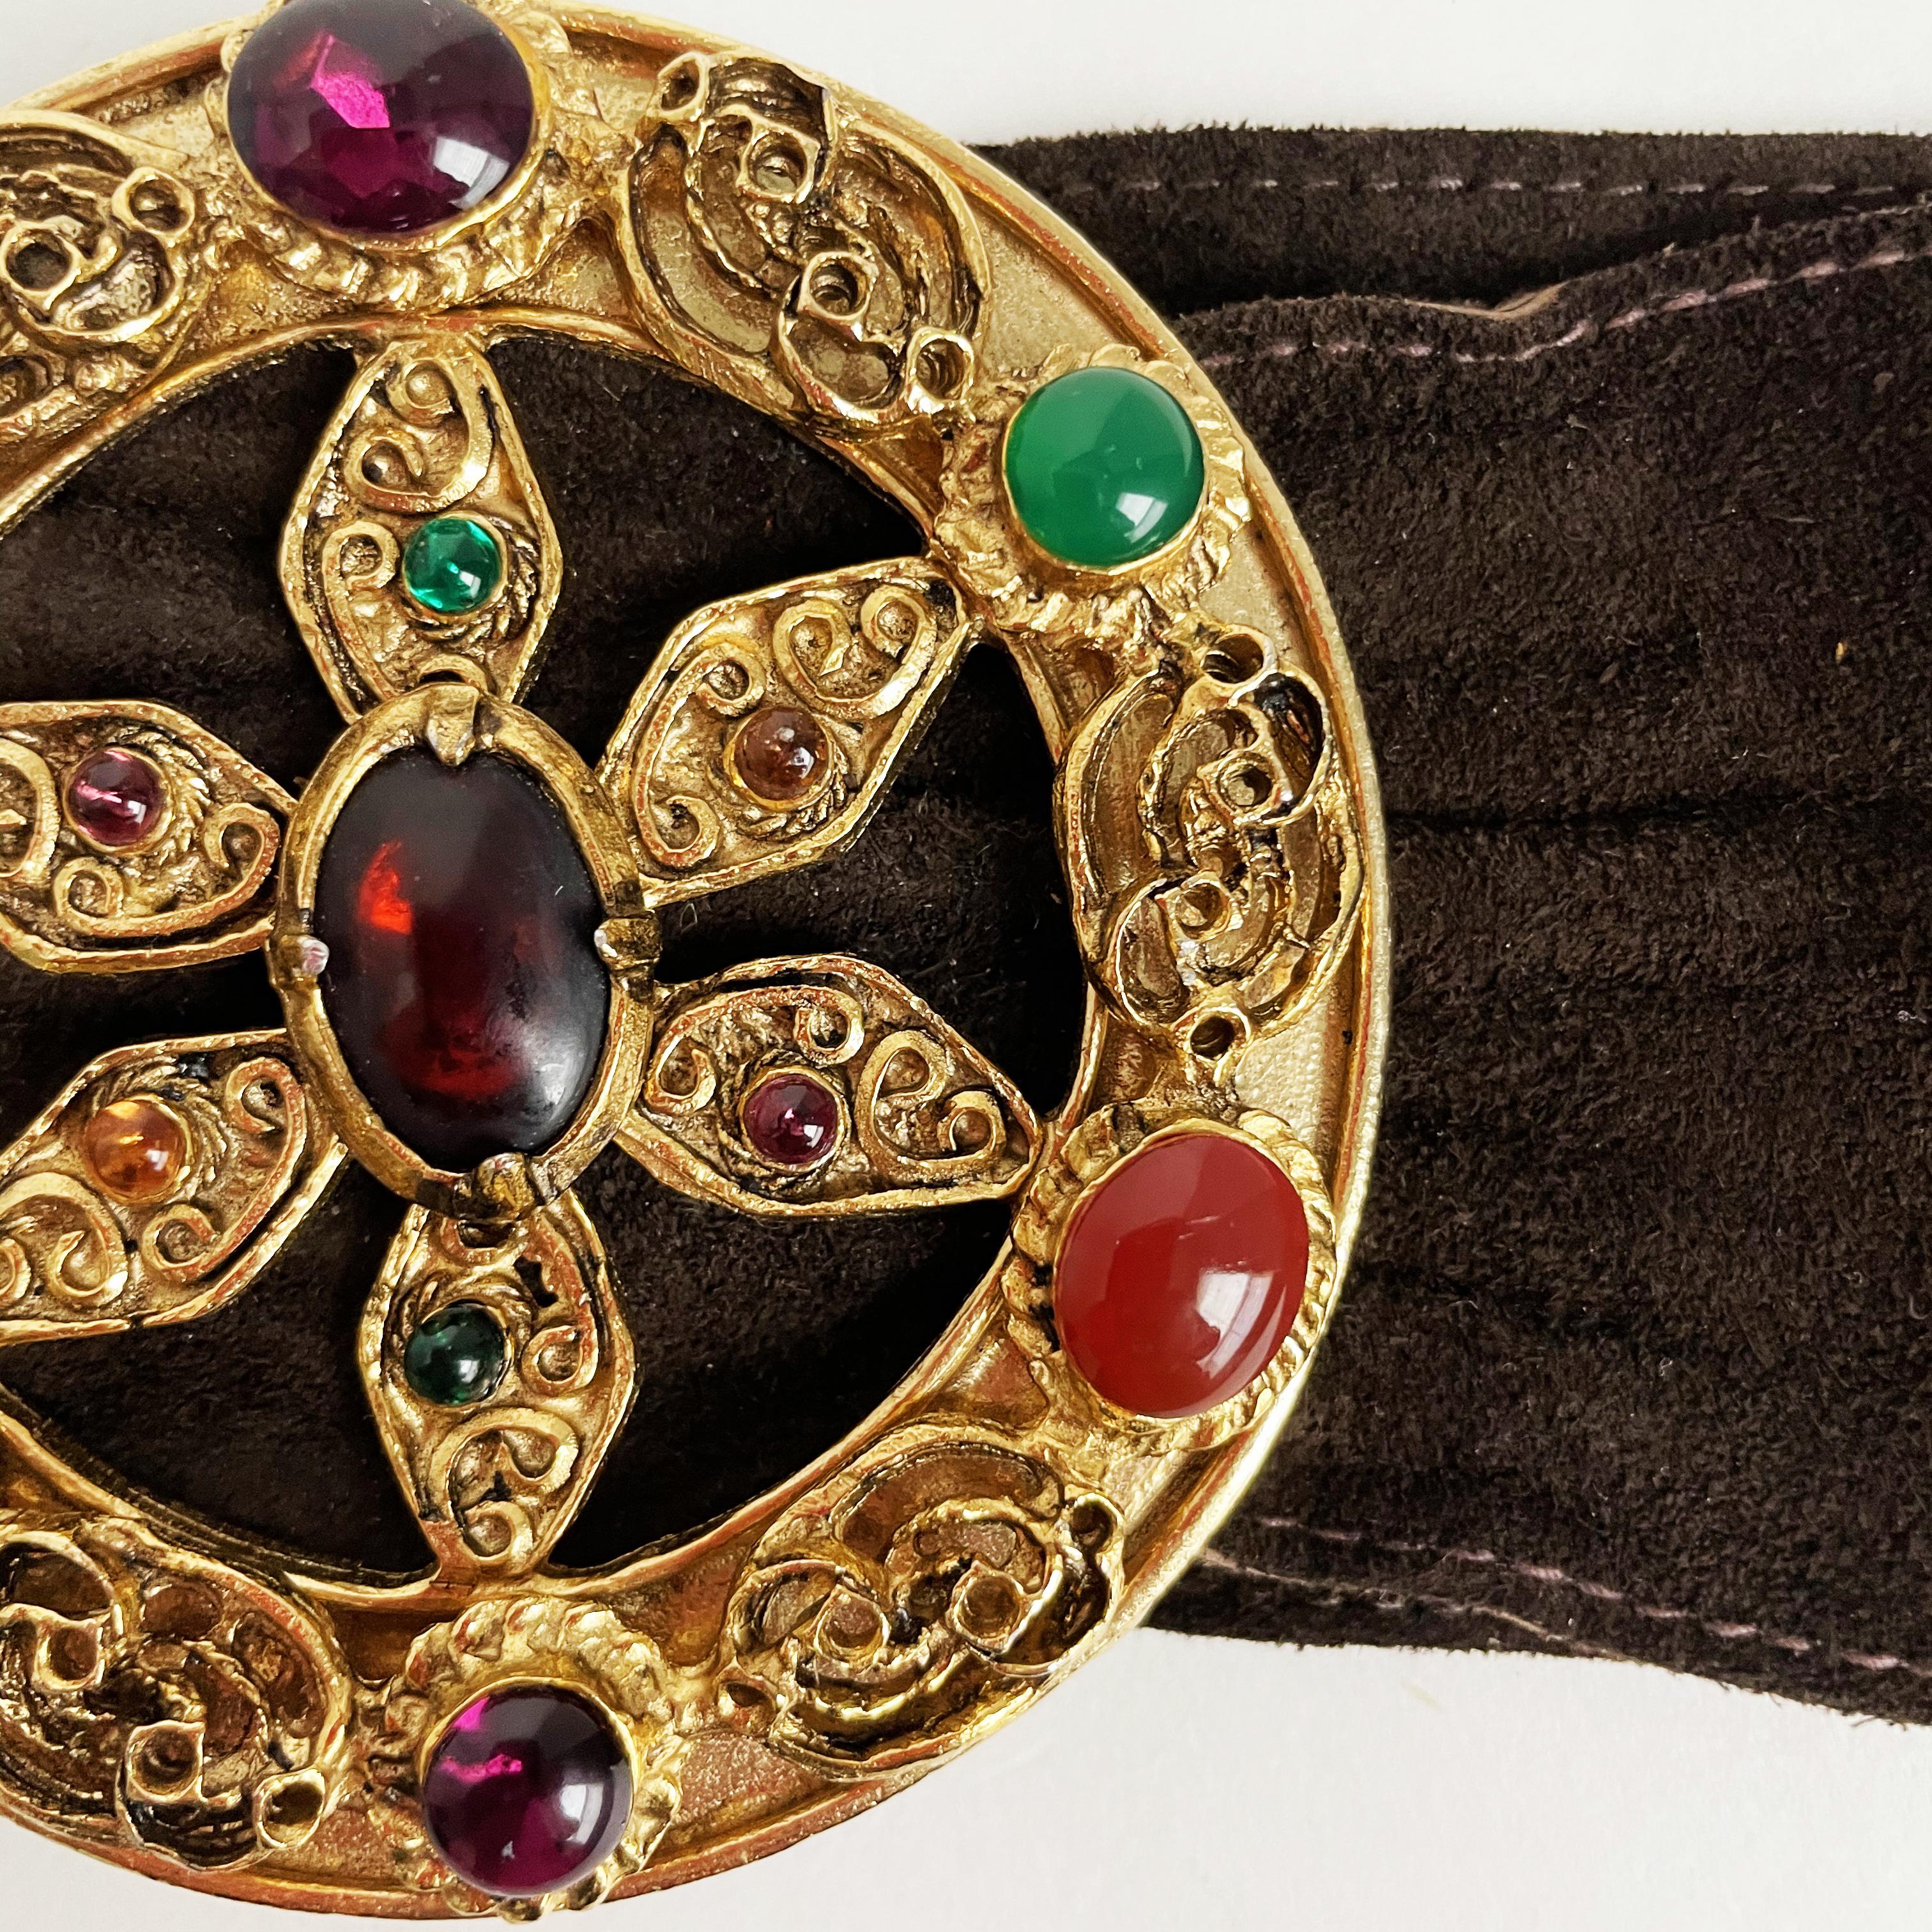 Yves Saint Laurent Belt Colorful Glass Cabochons Buckle Suede Leather 70s S/M 12